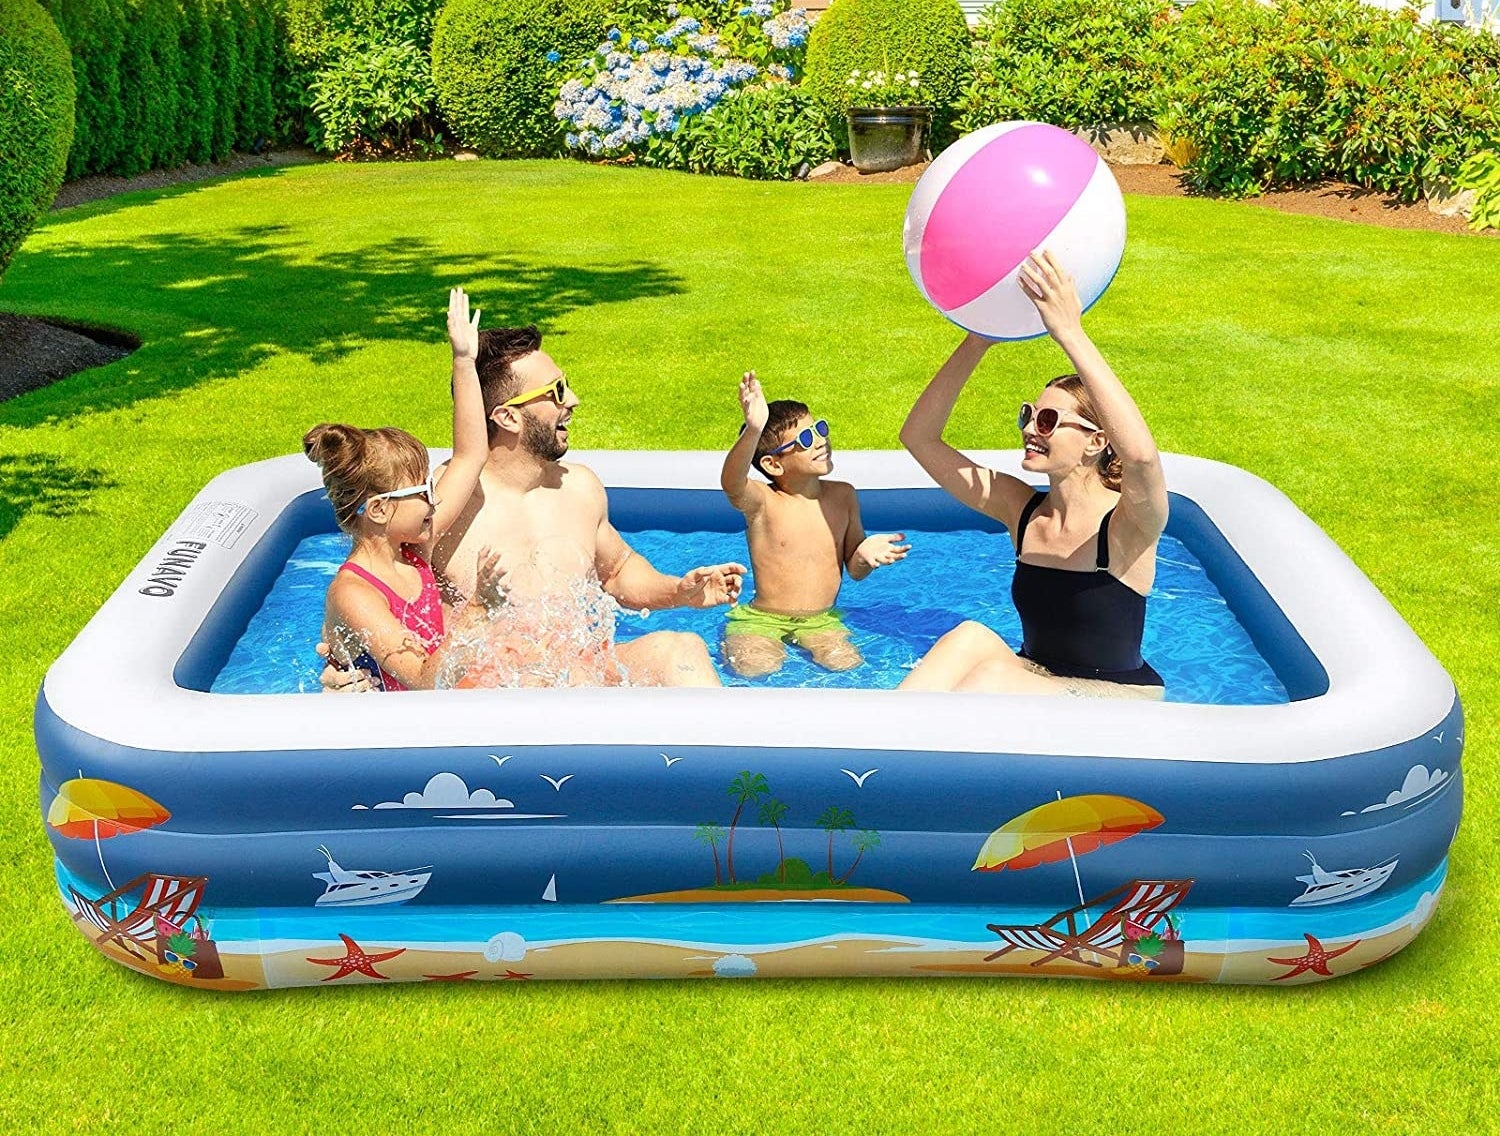 A family playing in the pool